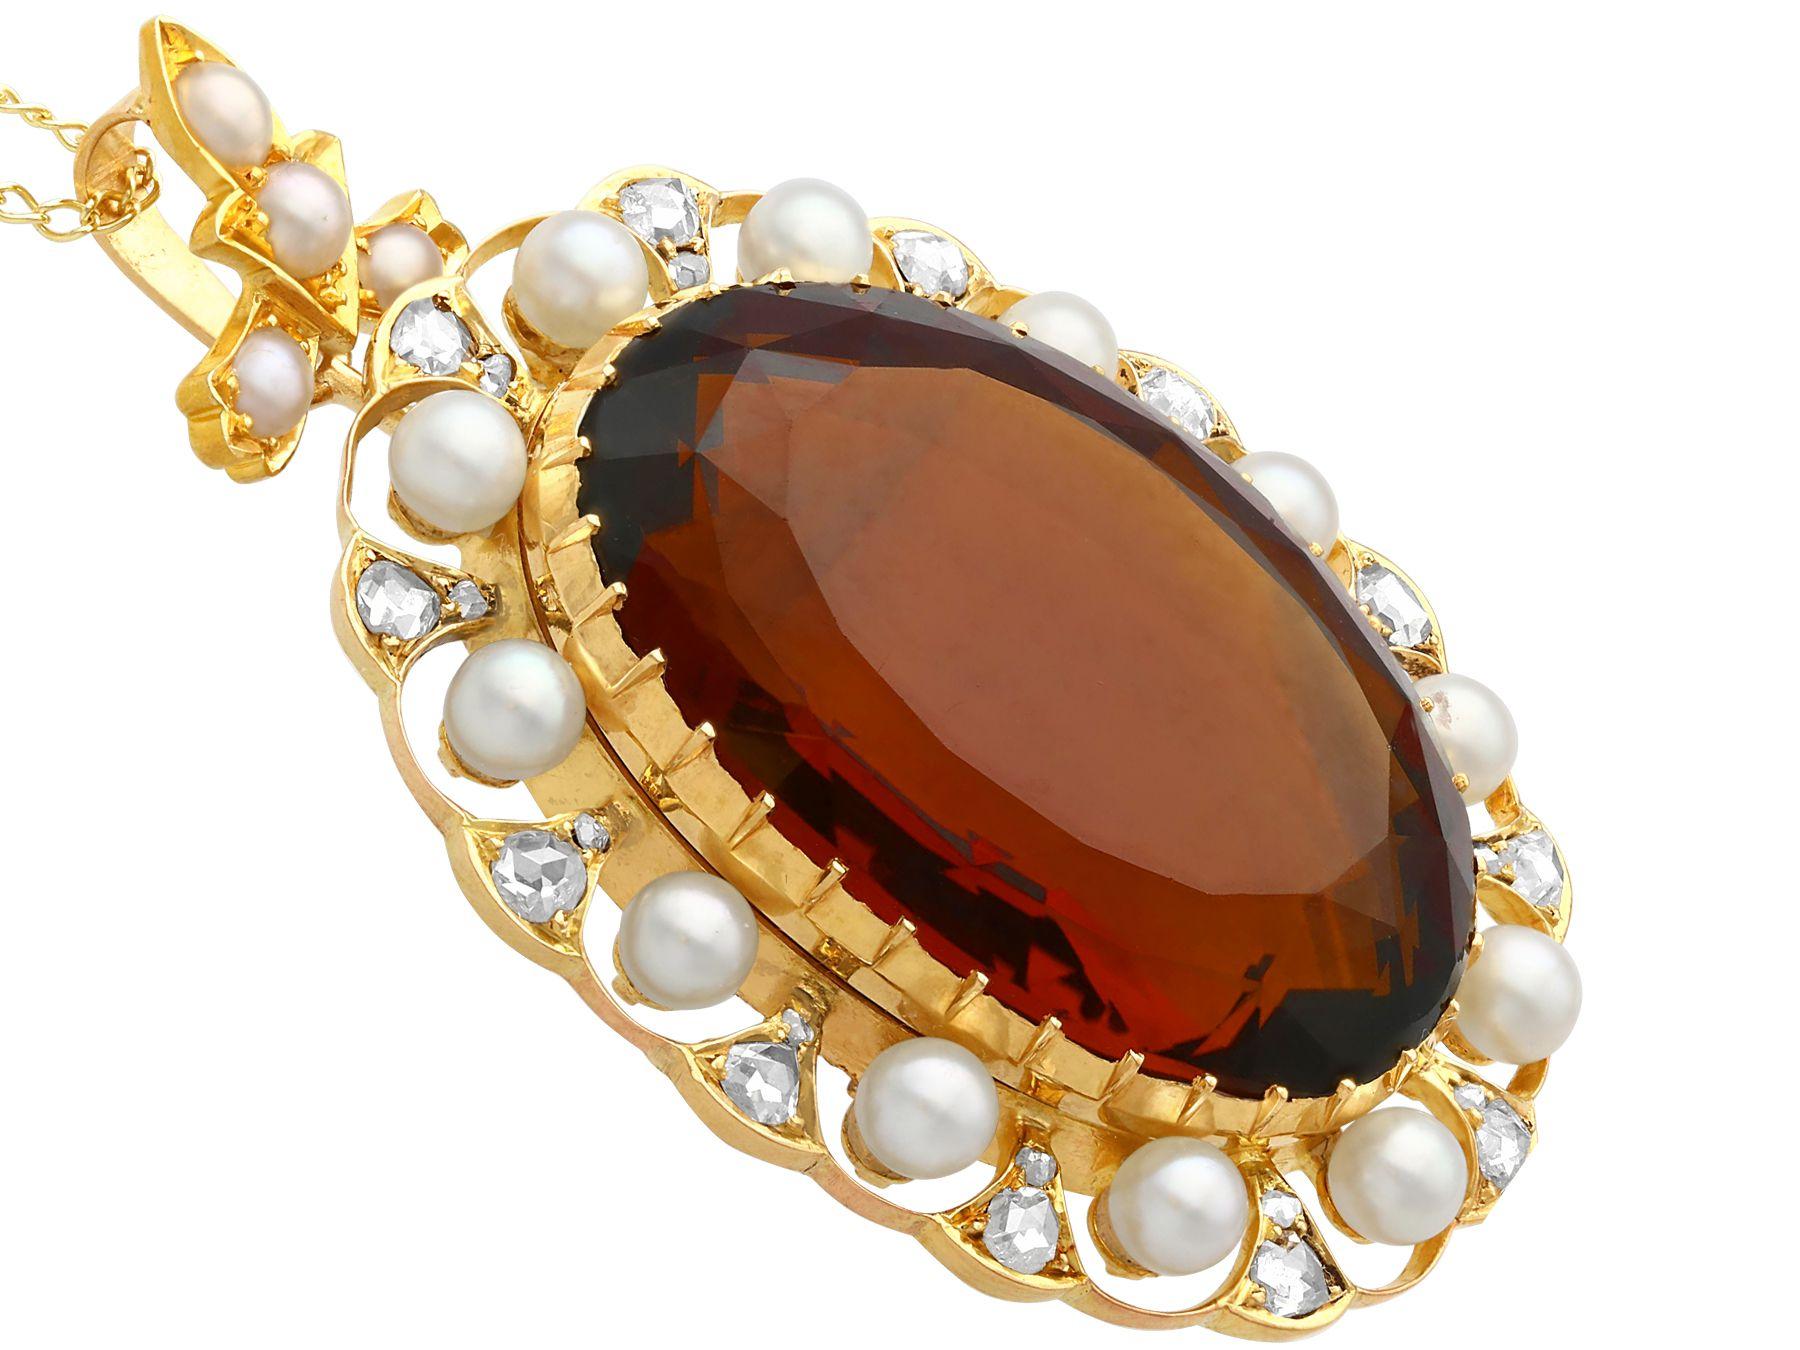 Oval Cut Antique 49.55 Carat Citrine 1.06 Carat Diamond Pearl and Yellow Gold Pendant For Sale